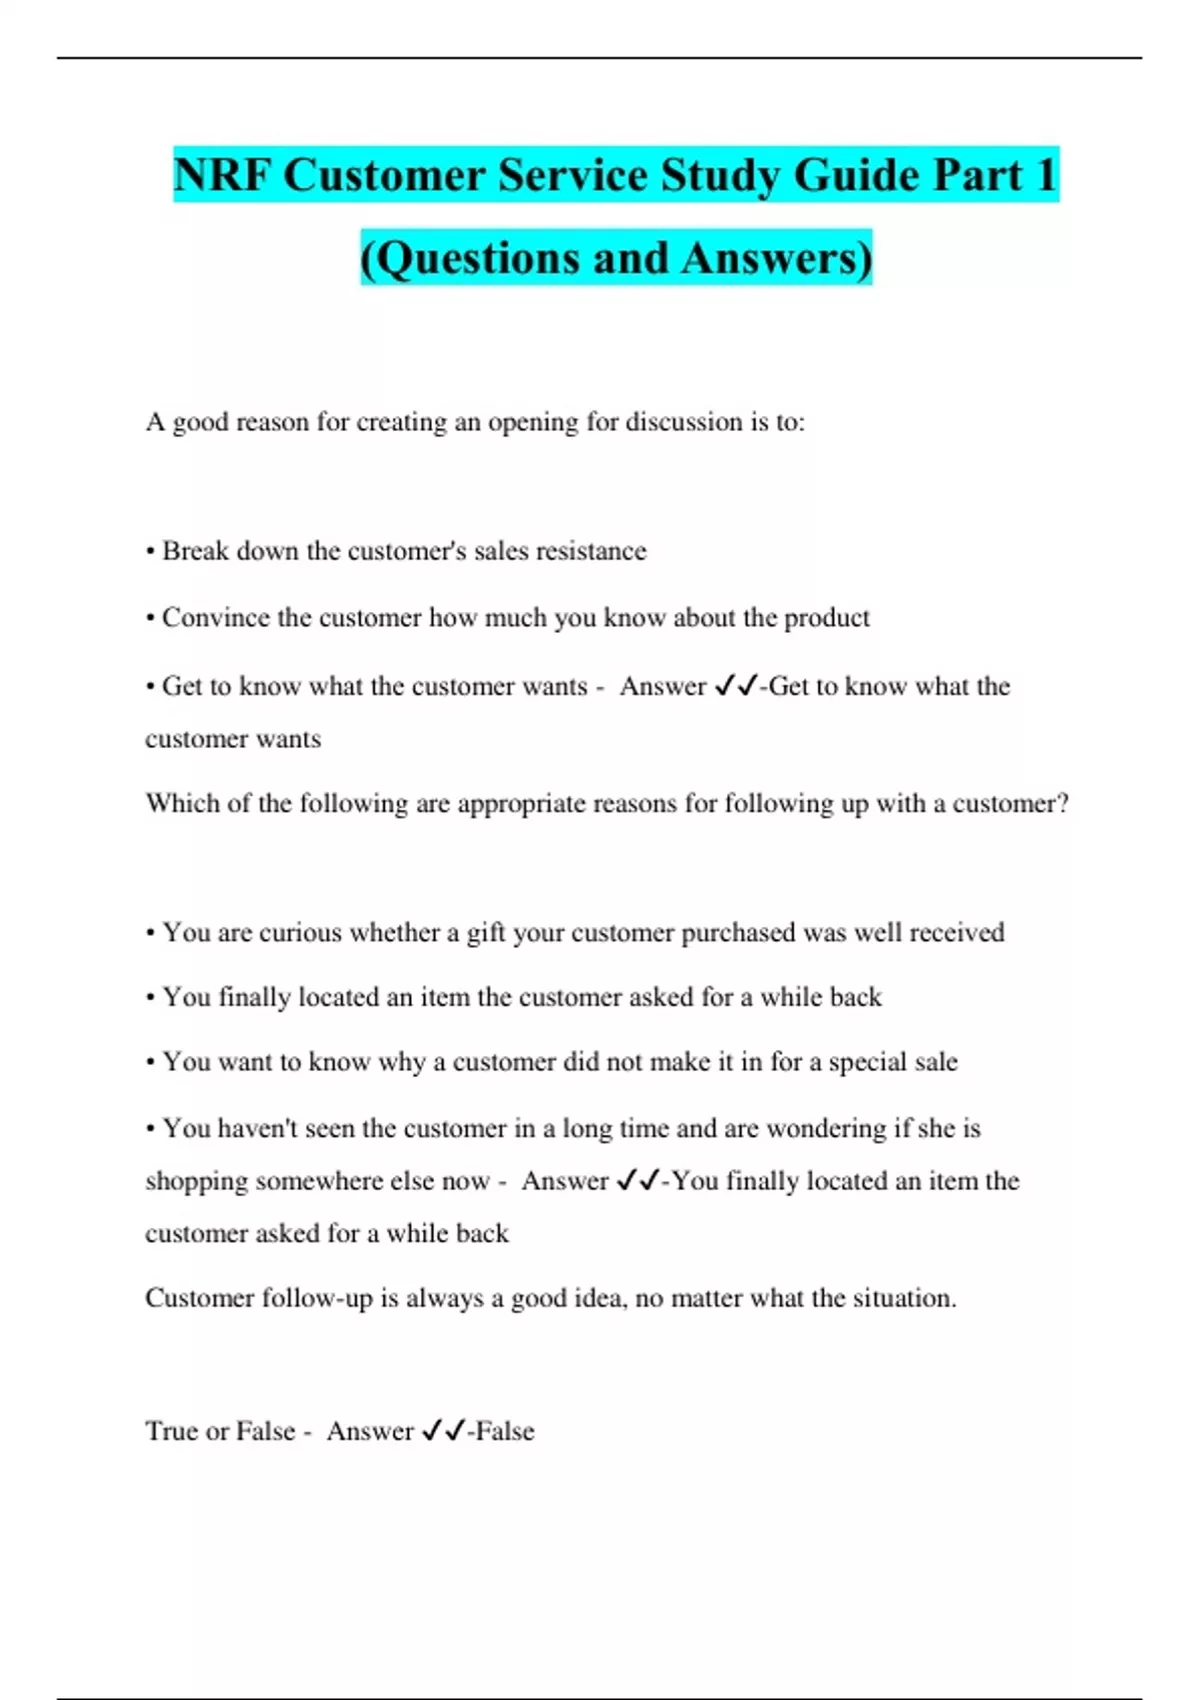 NRF Customer Service Study Guide Part 1 (Questions and Answers) NRF